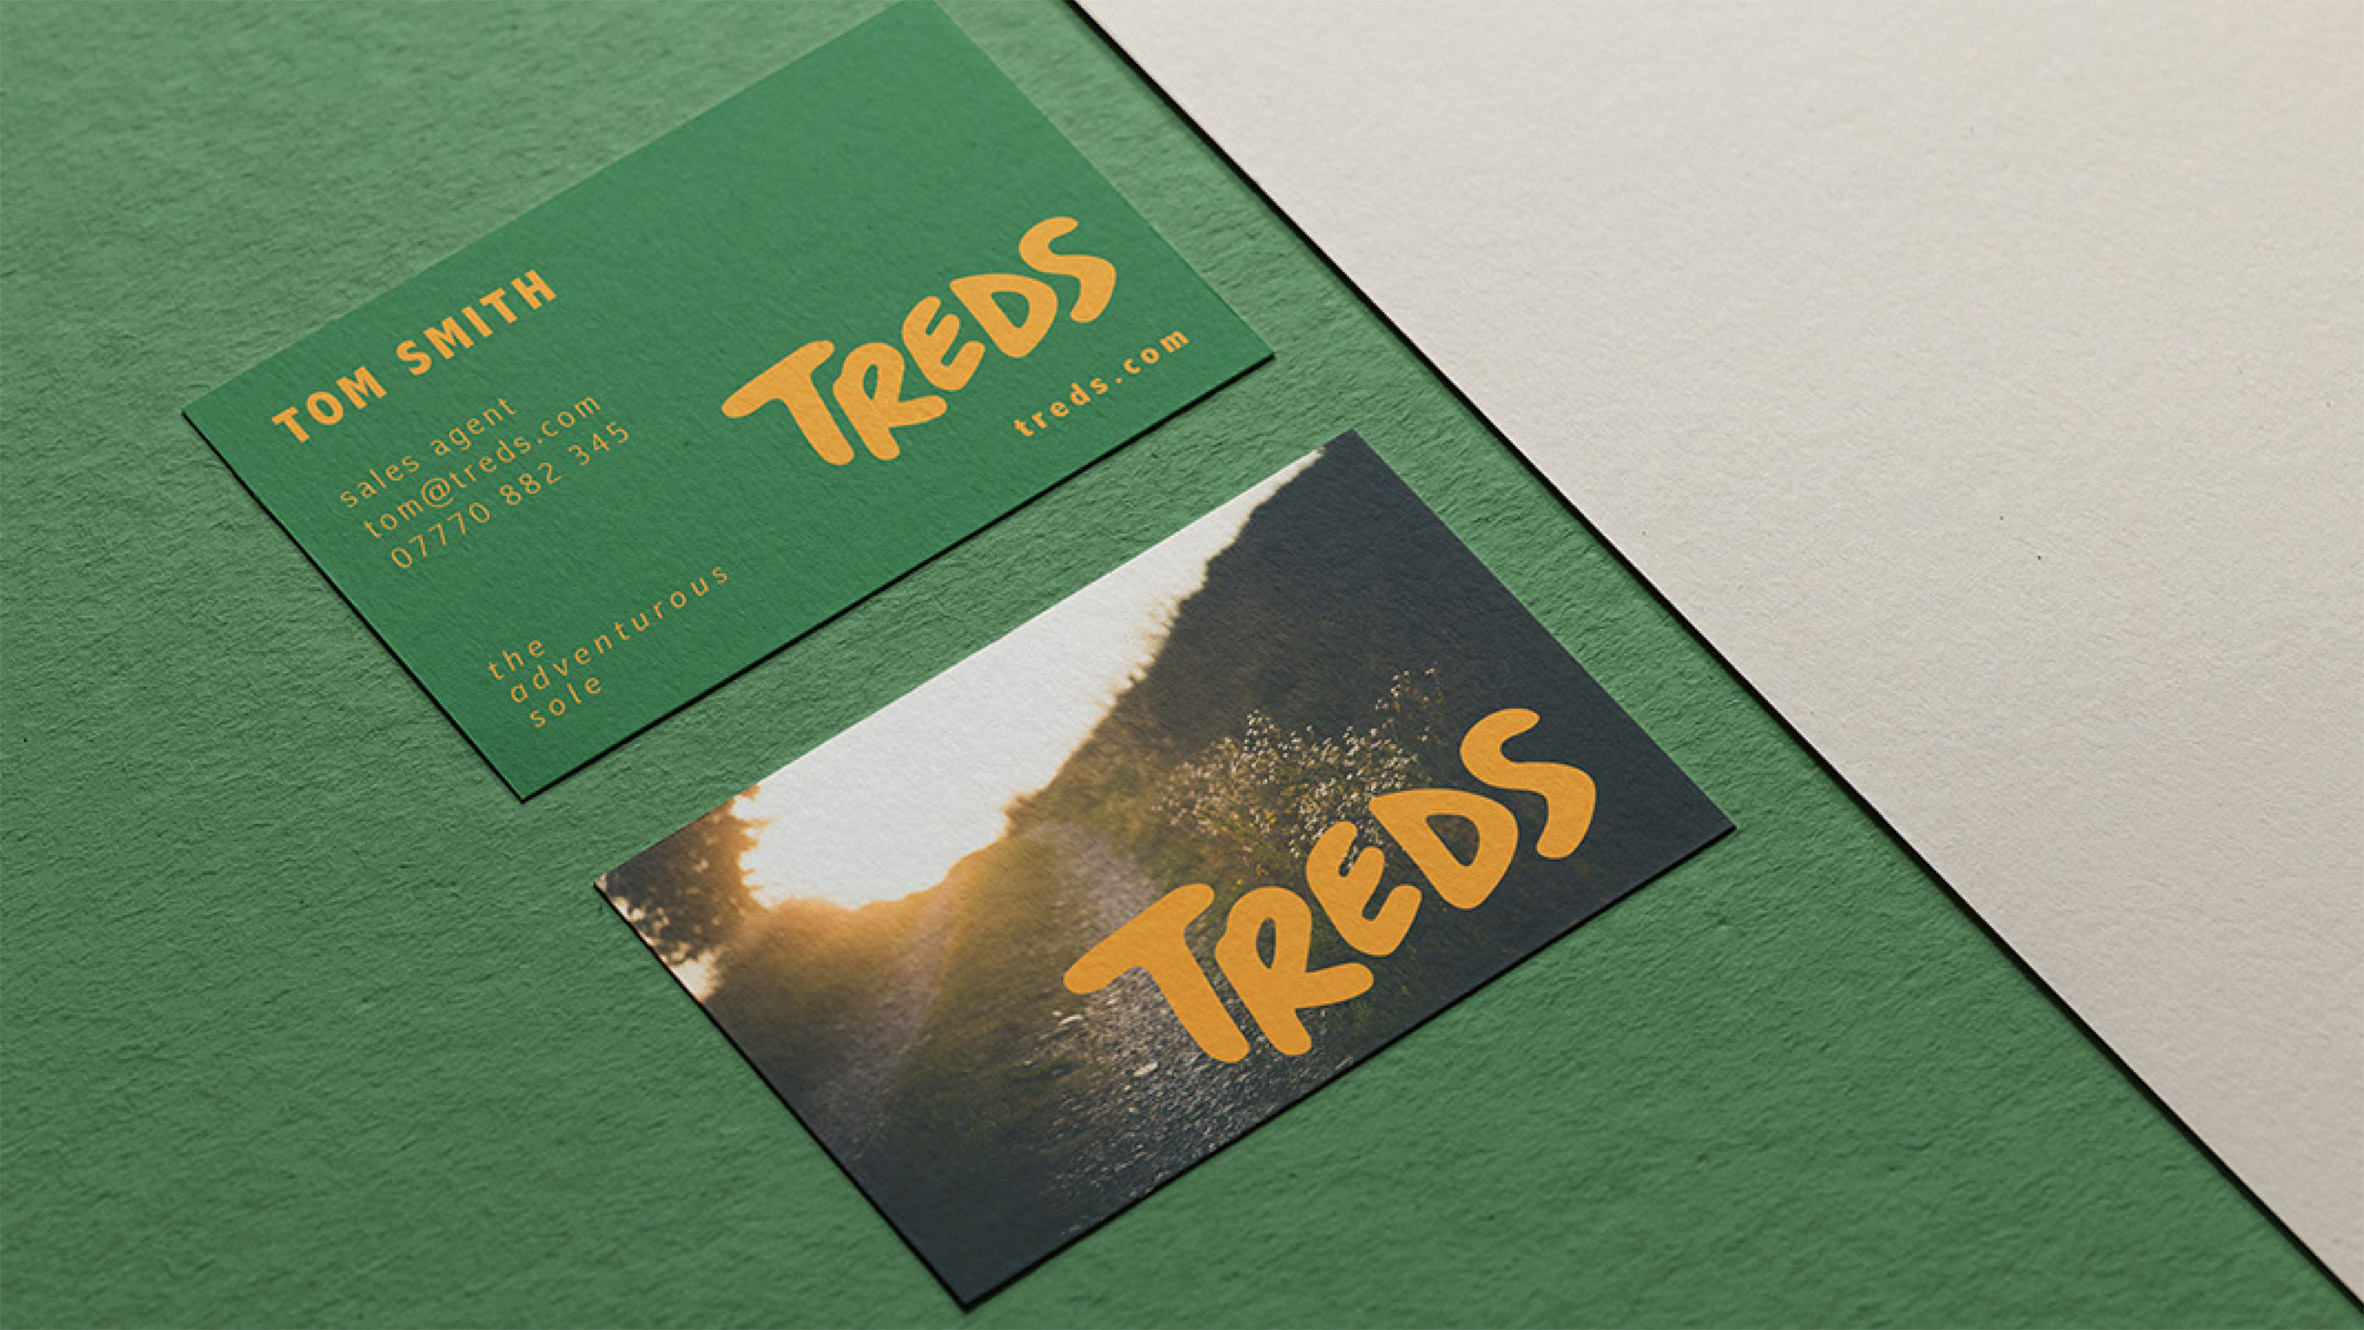 Business cards with green and yellow branding for outdoor footwear